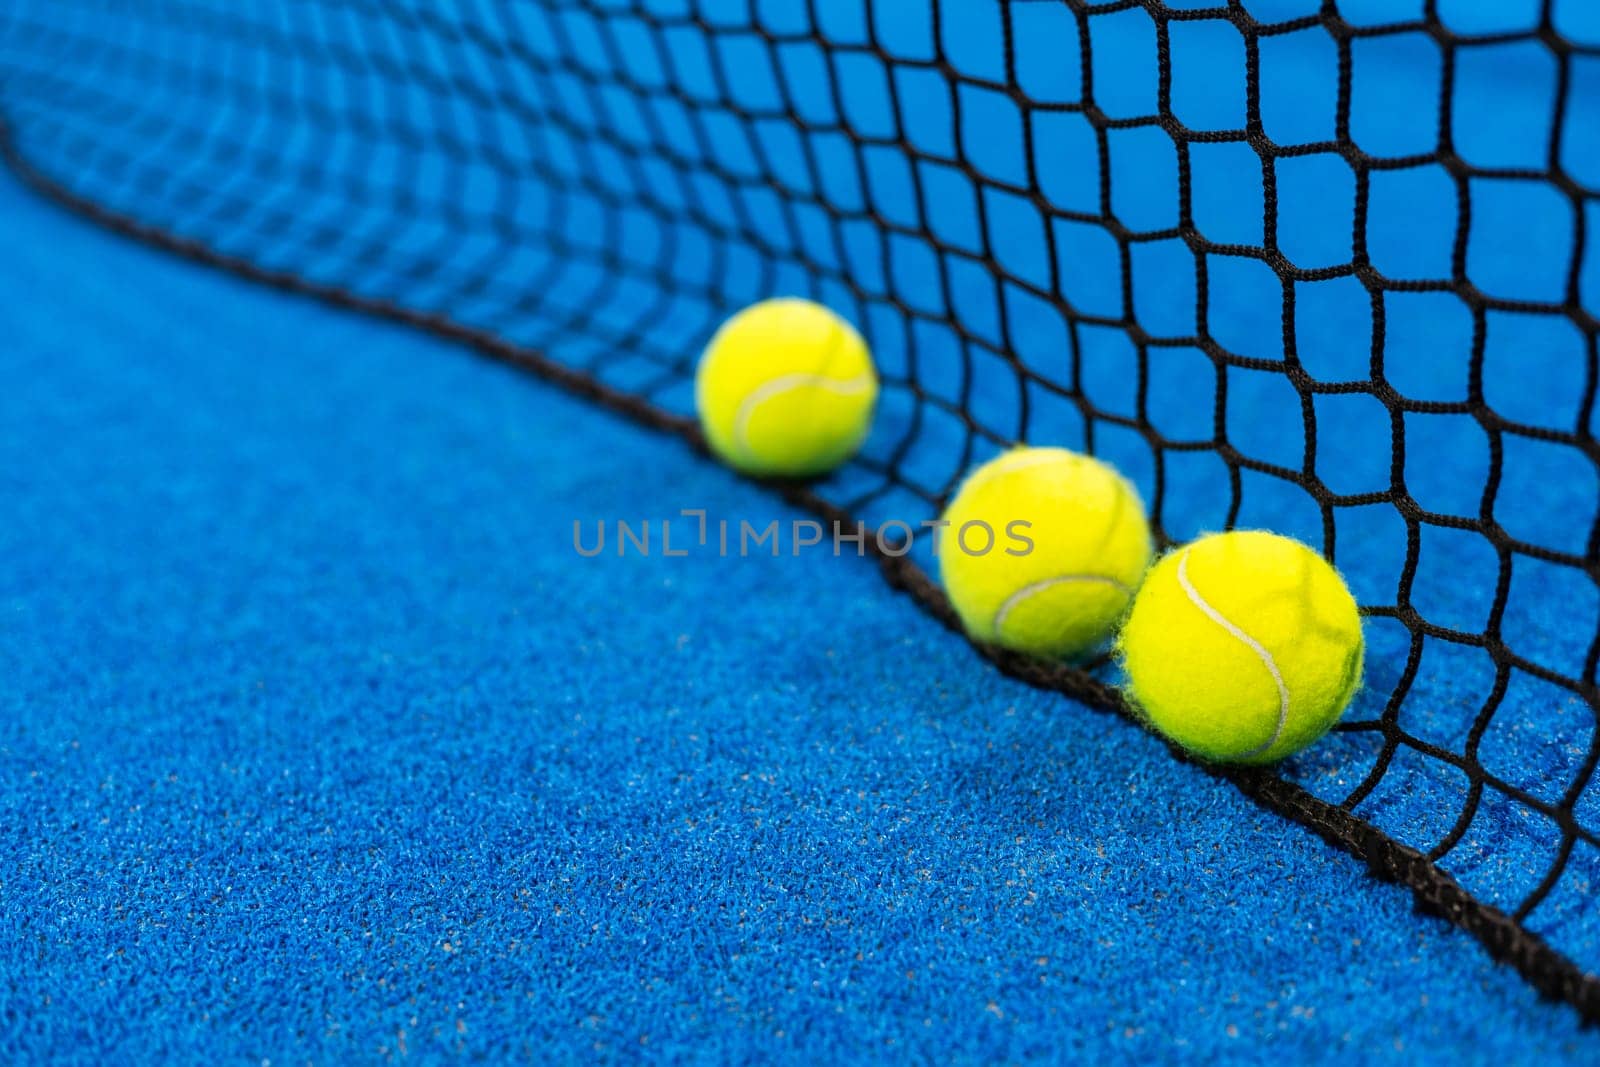 paddle tennis racket and balls on court, night image. High quality photo